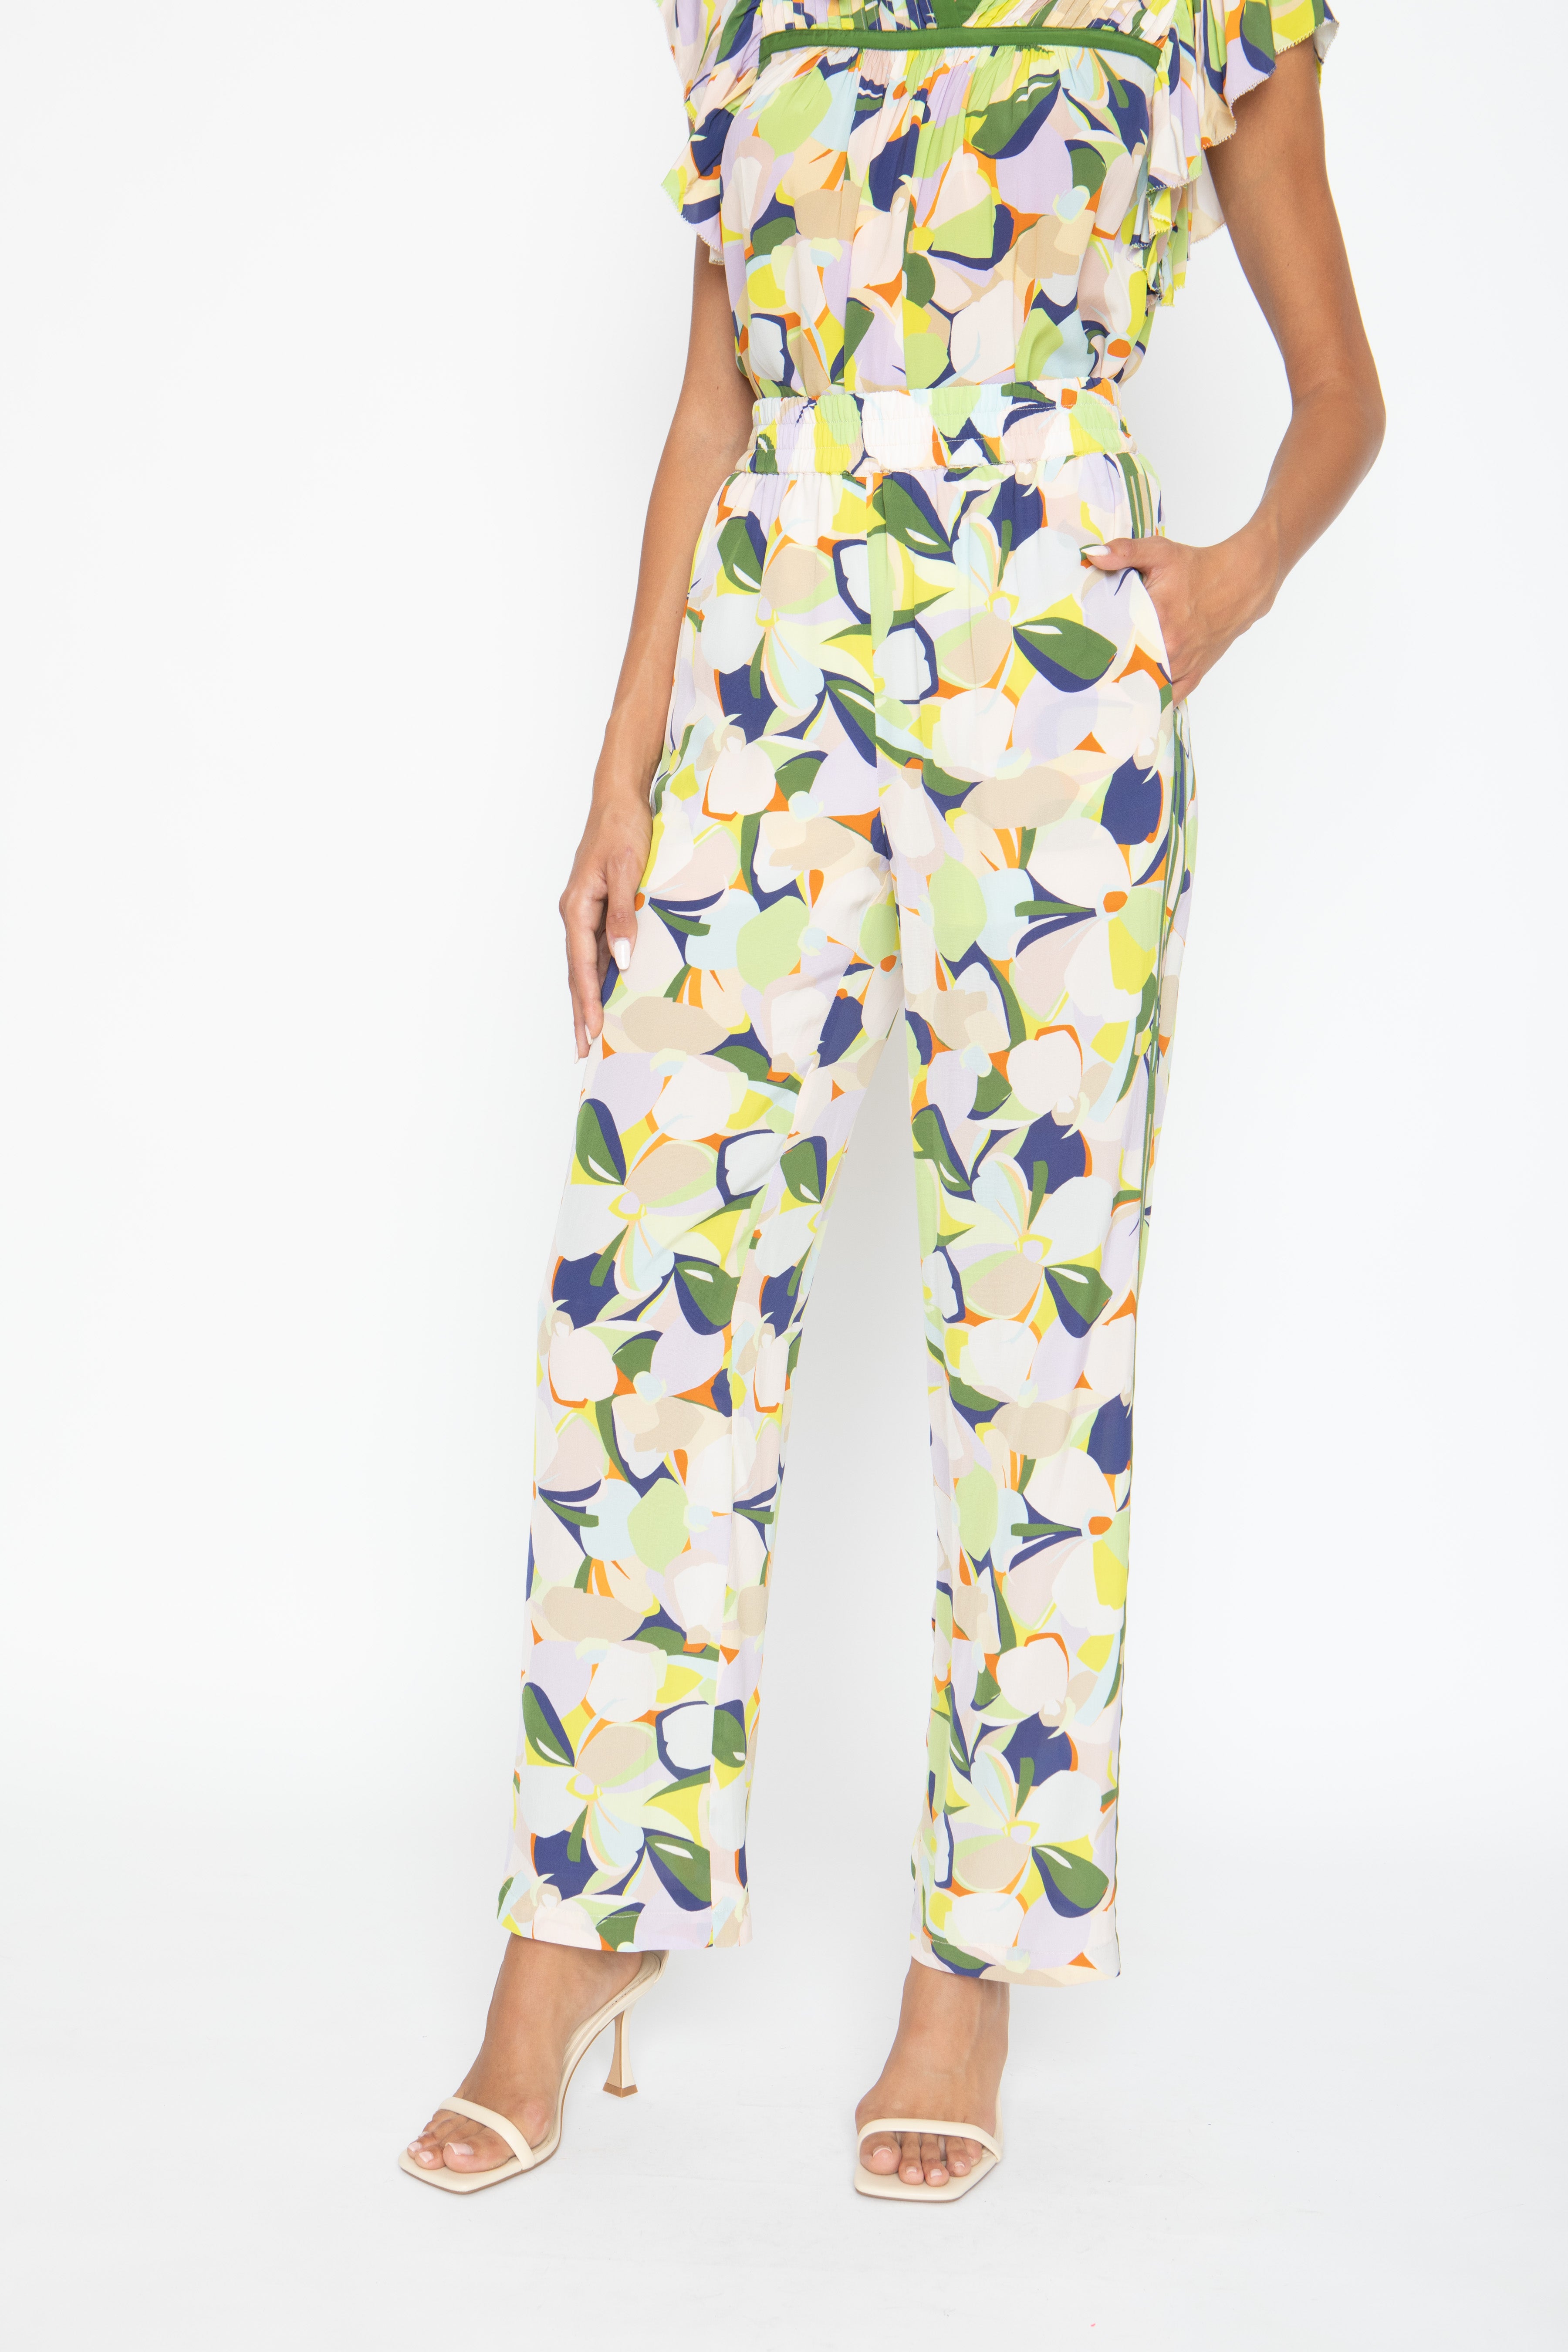 Max Retro Flower Pant FINAL SALE - CABALLERO COLLECTION